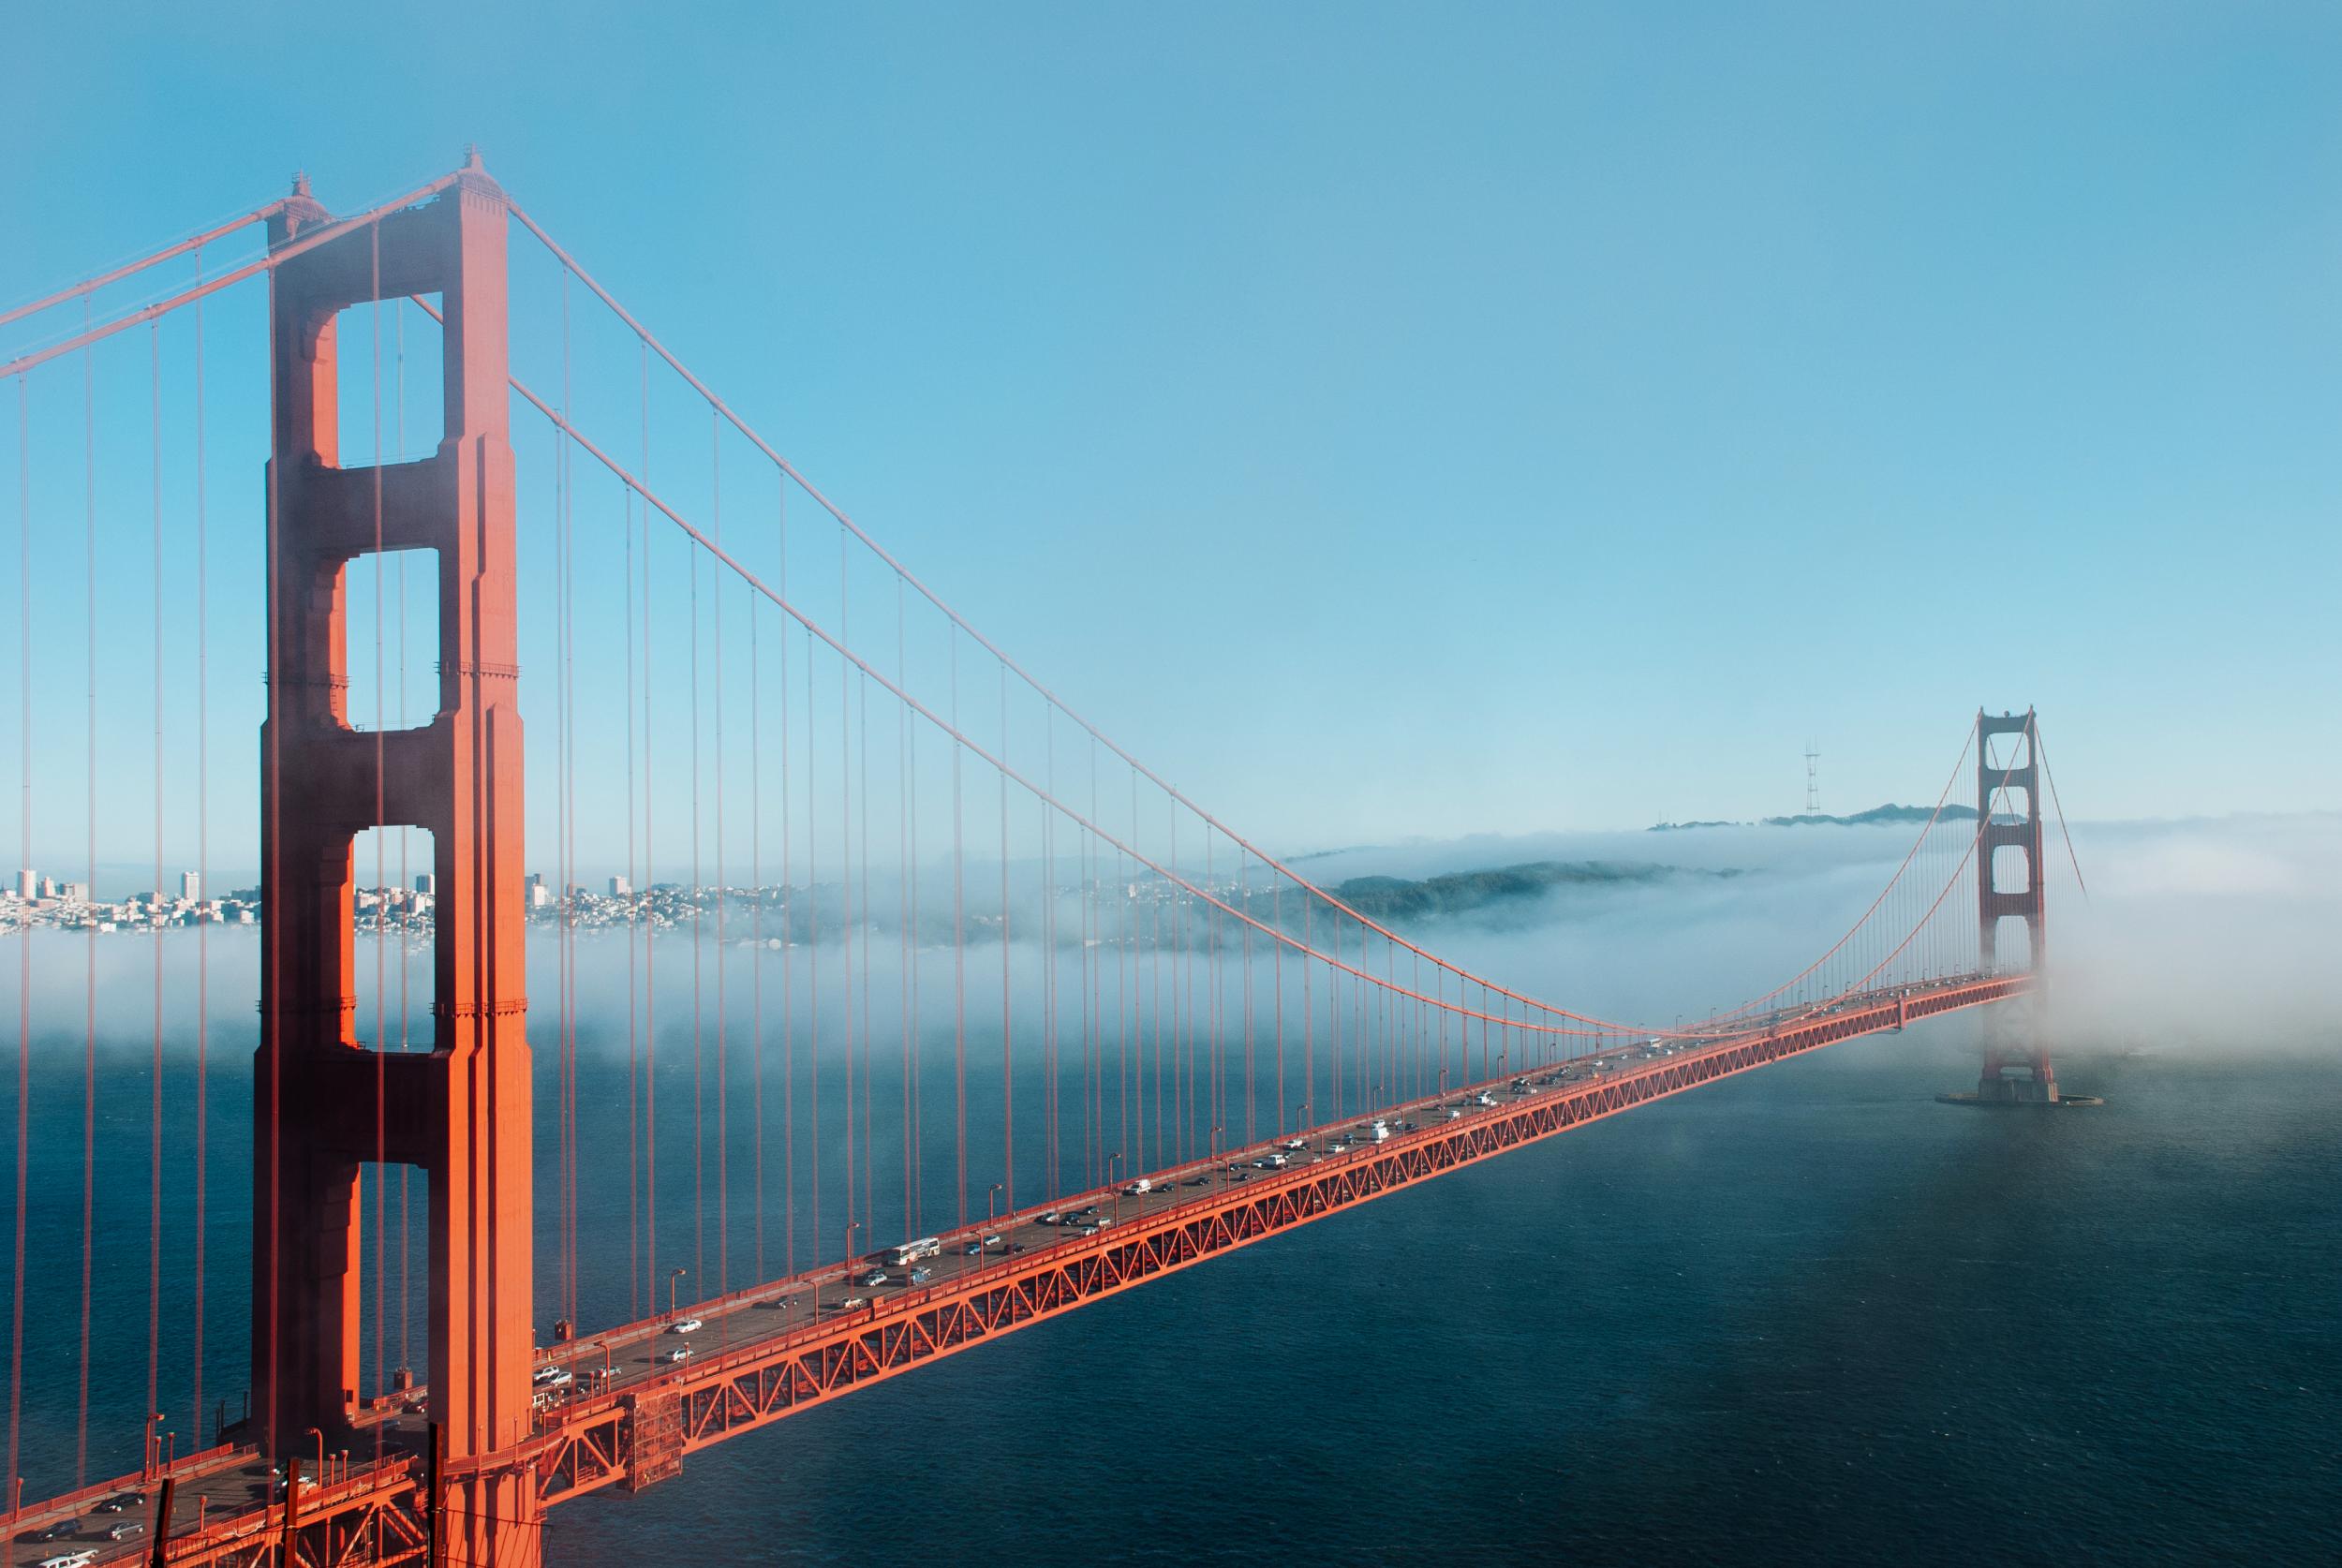 The Golden Gate Bridge has become an iconic structure